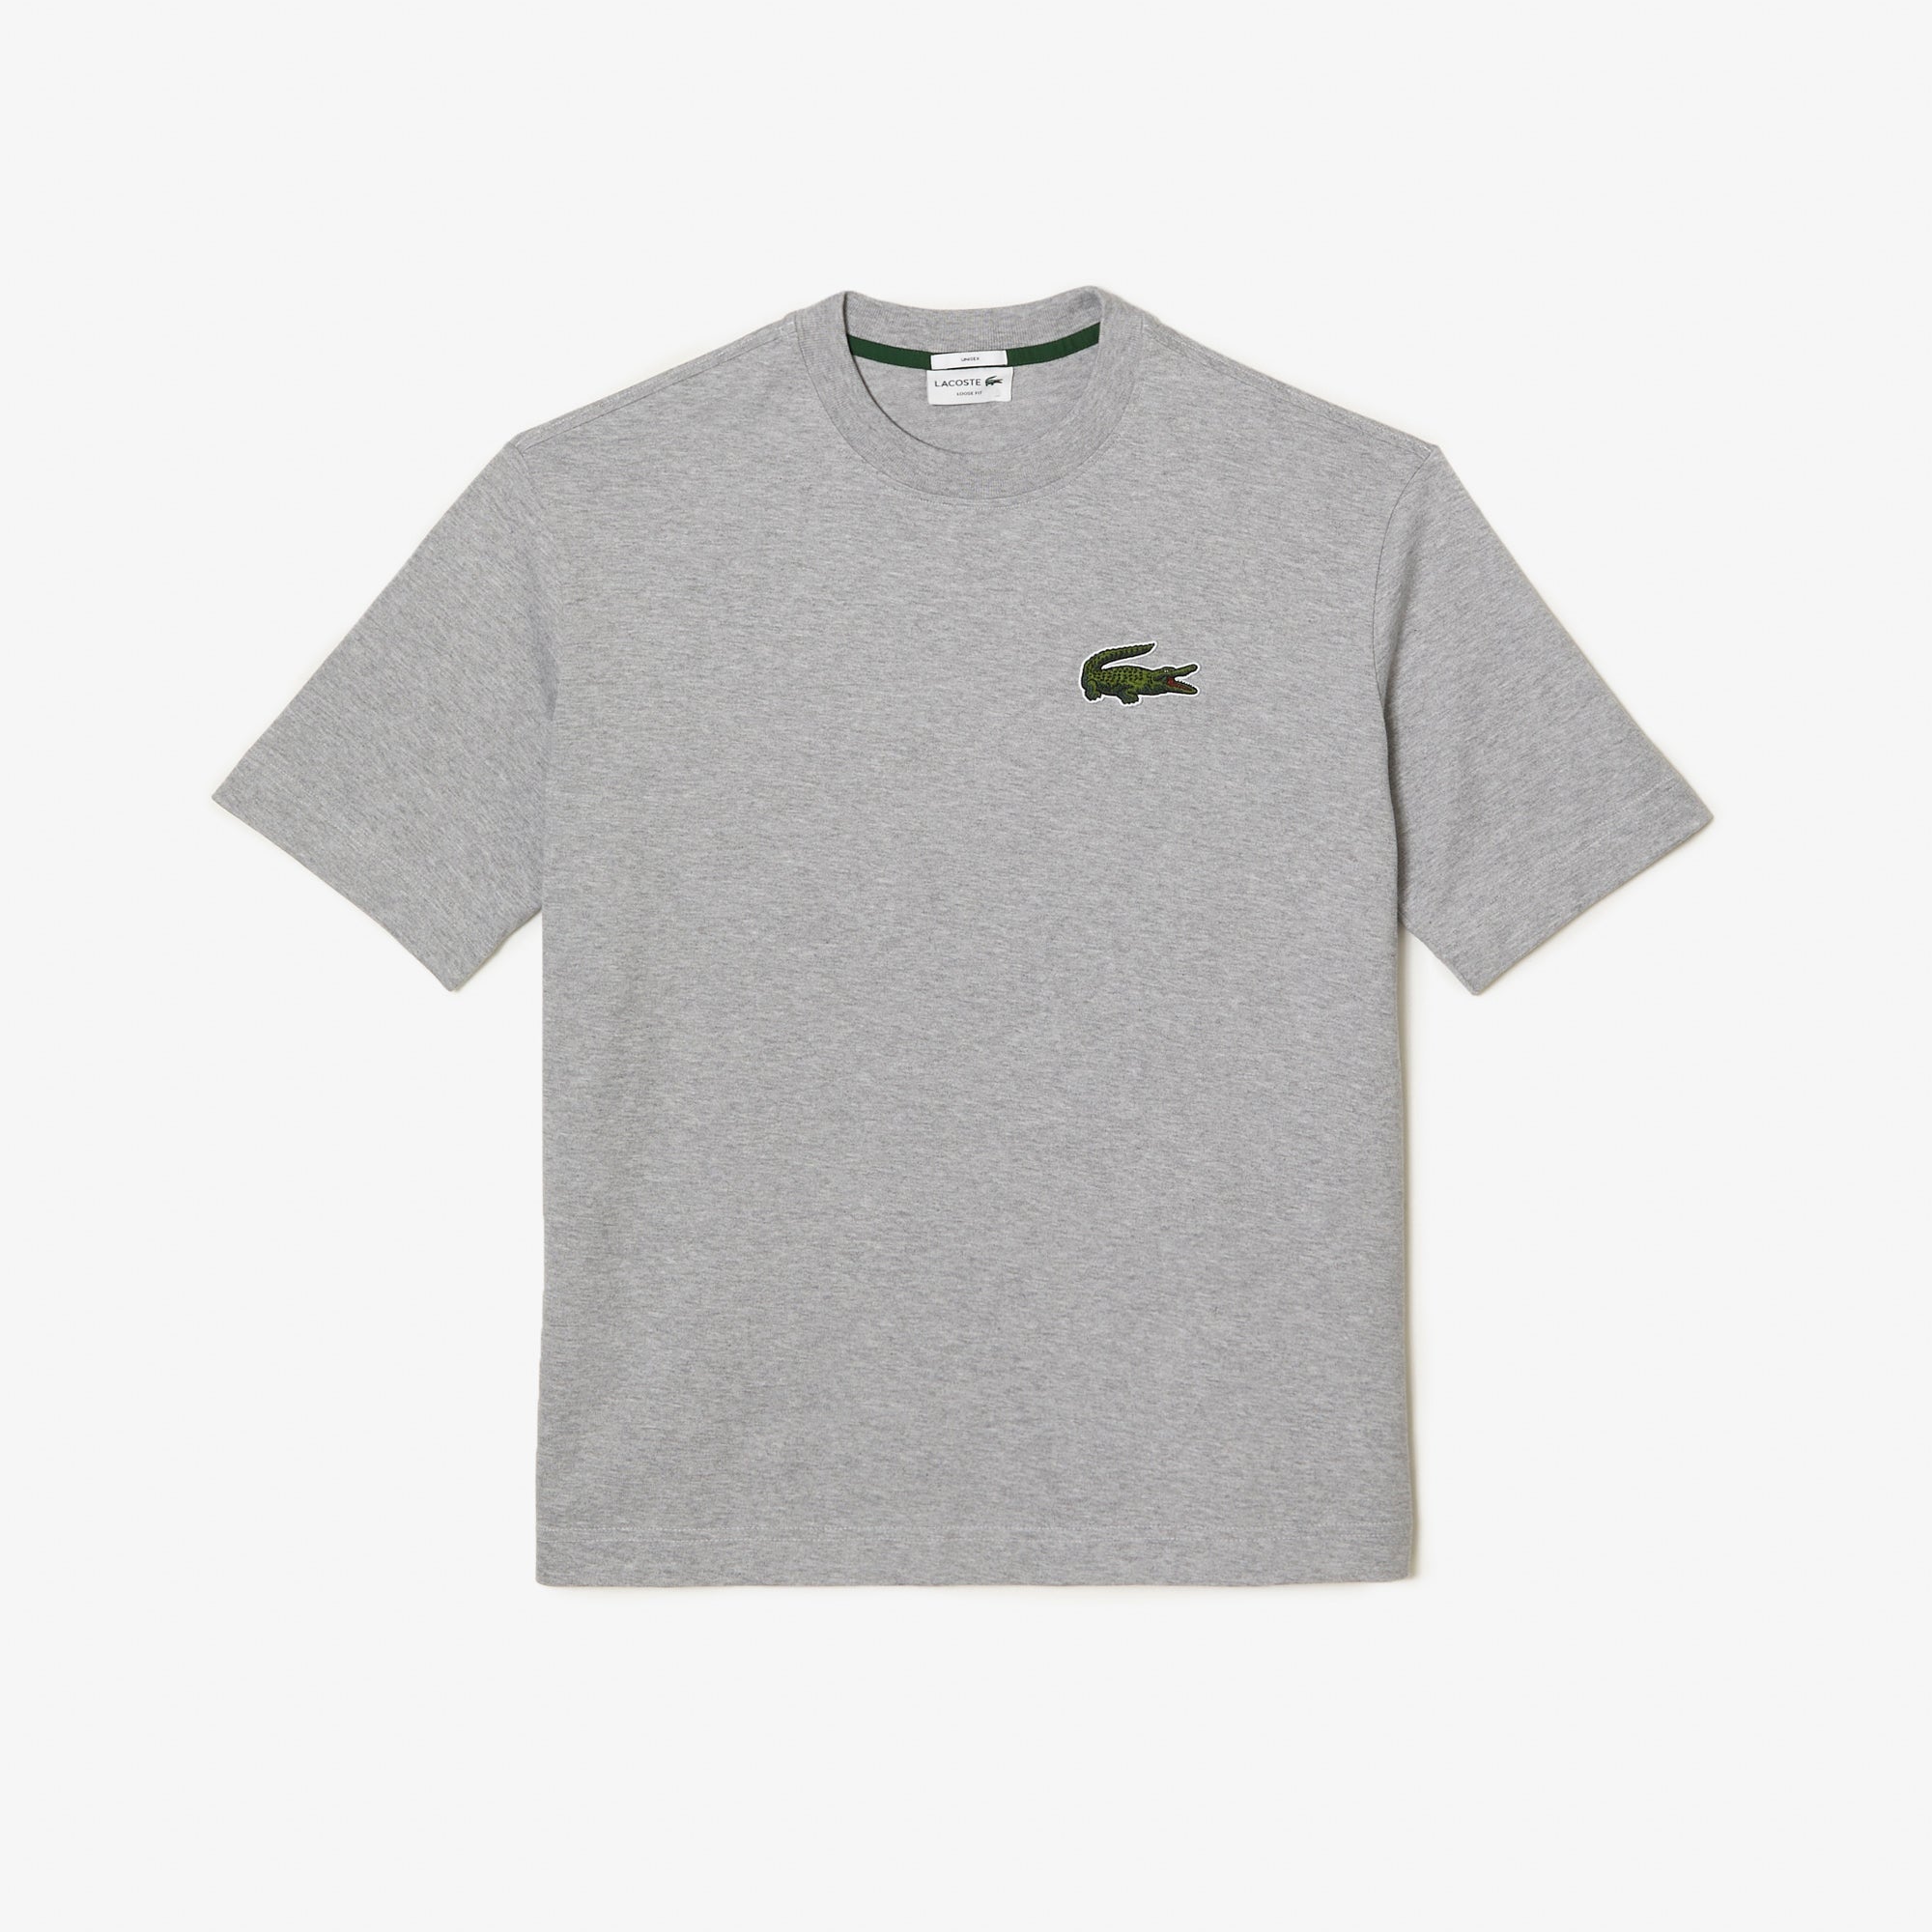 Lacoste Unisex Loose Fit Large Crocodile Organic Cotton T-Shirt Grey Chine TH0062 CCA